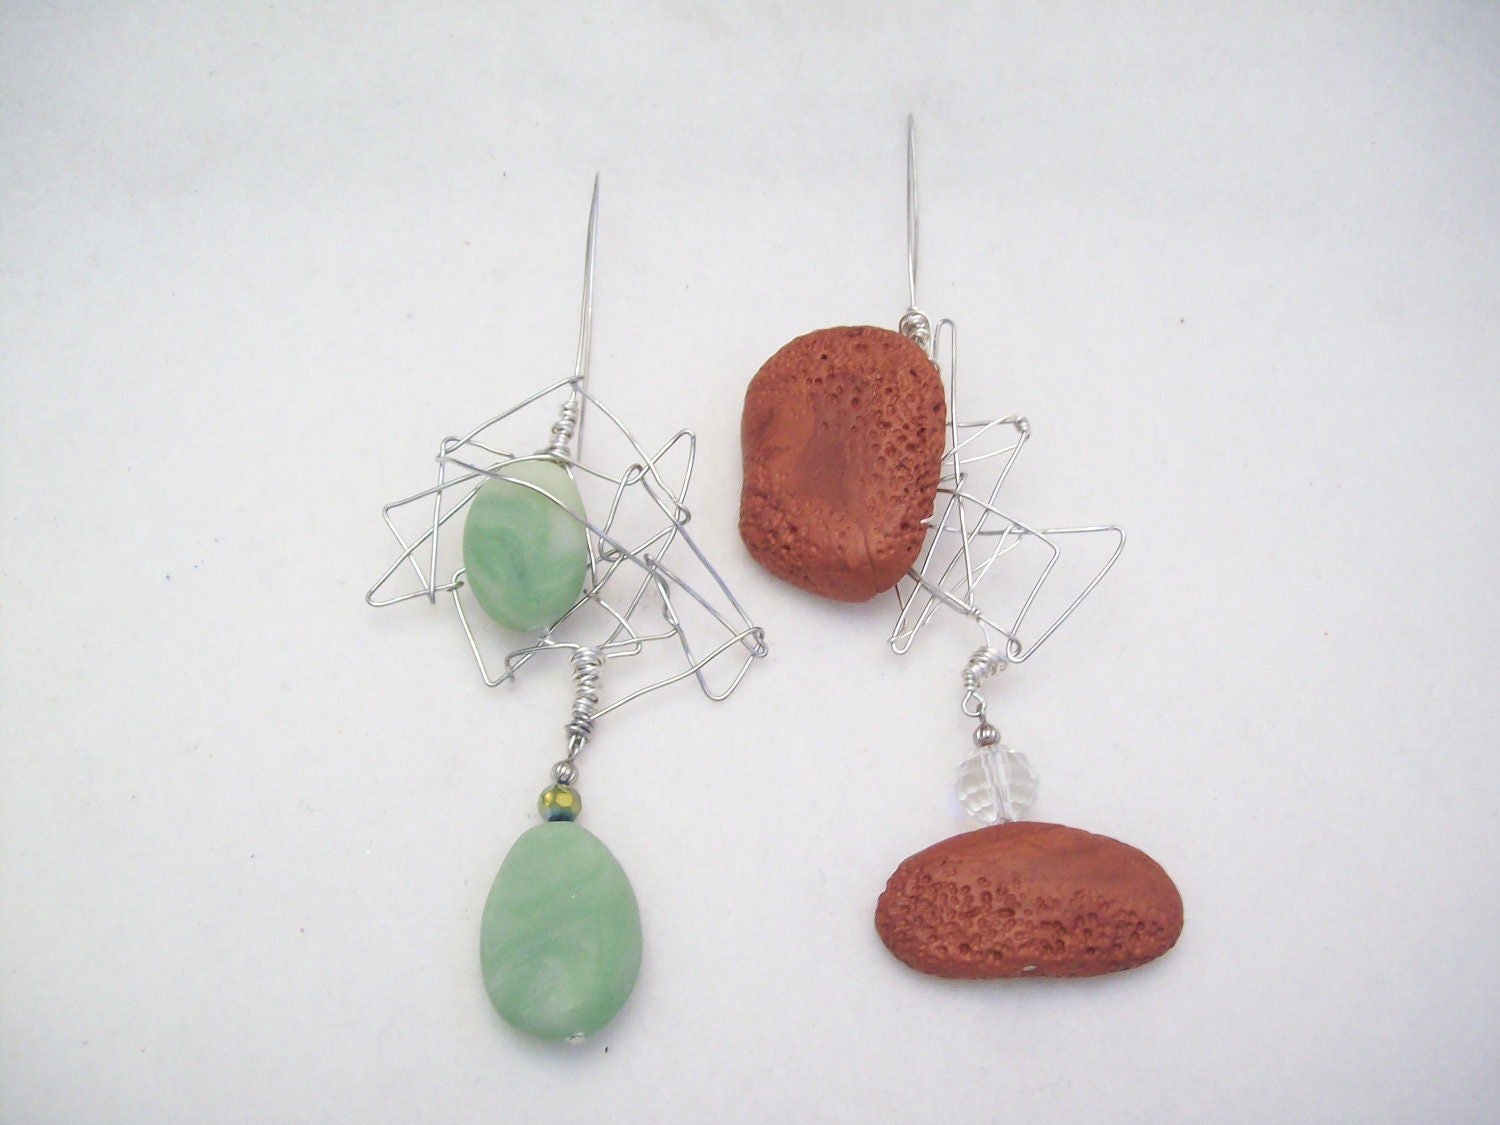 EARWIRE SOLO earring listing is for one